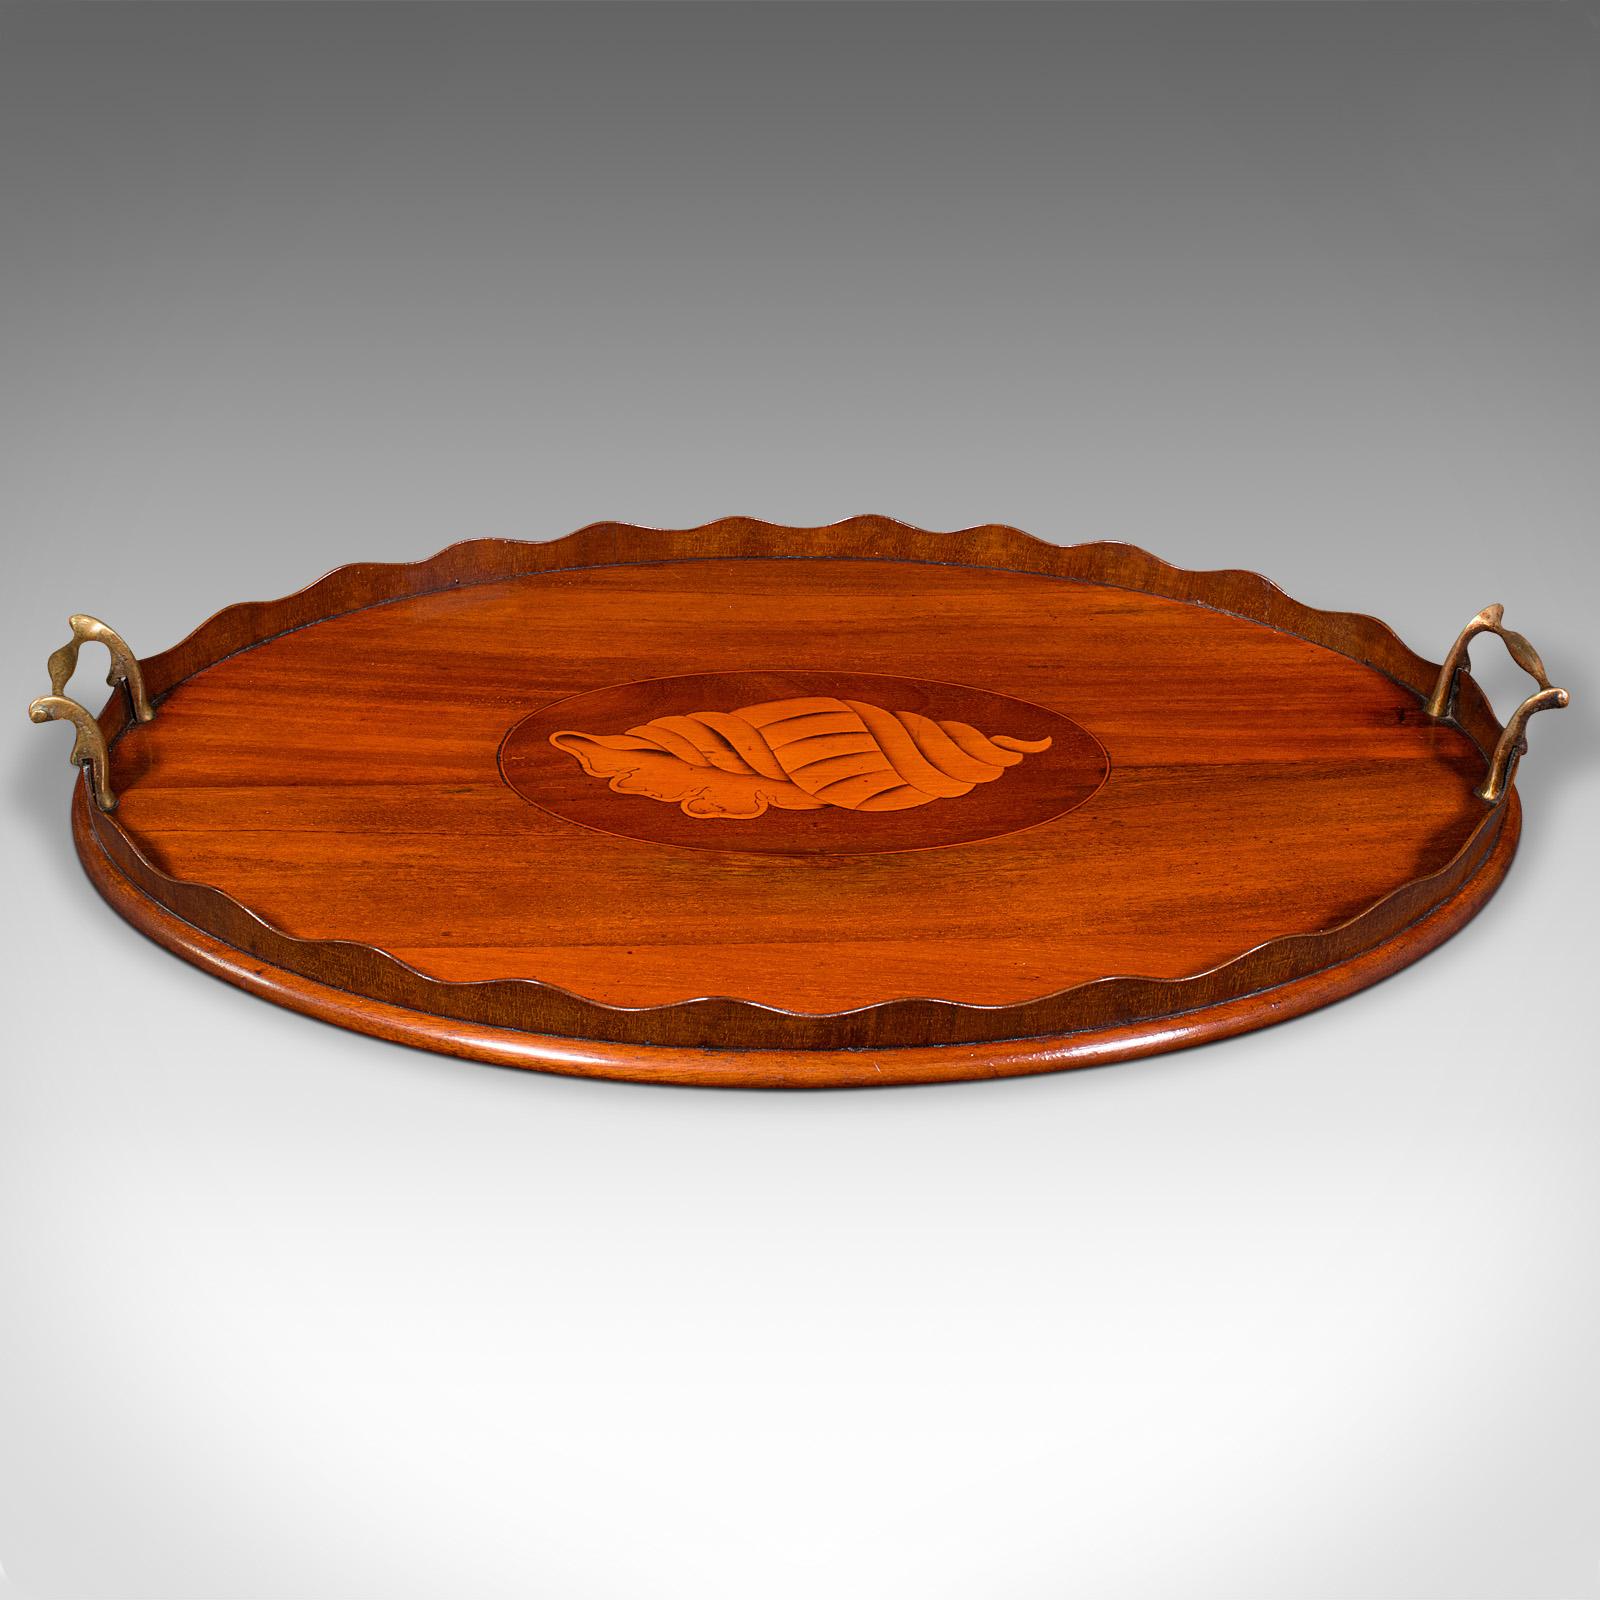 This is an antique decorative afternoon tea tray. An English, mahogany and boxwood serving platter, dating to the Regency period, circa 1820.

Delightful tray for serving guests with Regency period elegance
Displaying a desirable aged patina and in